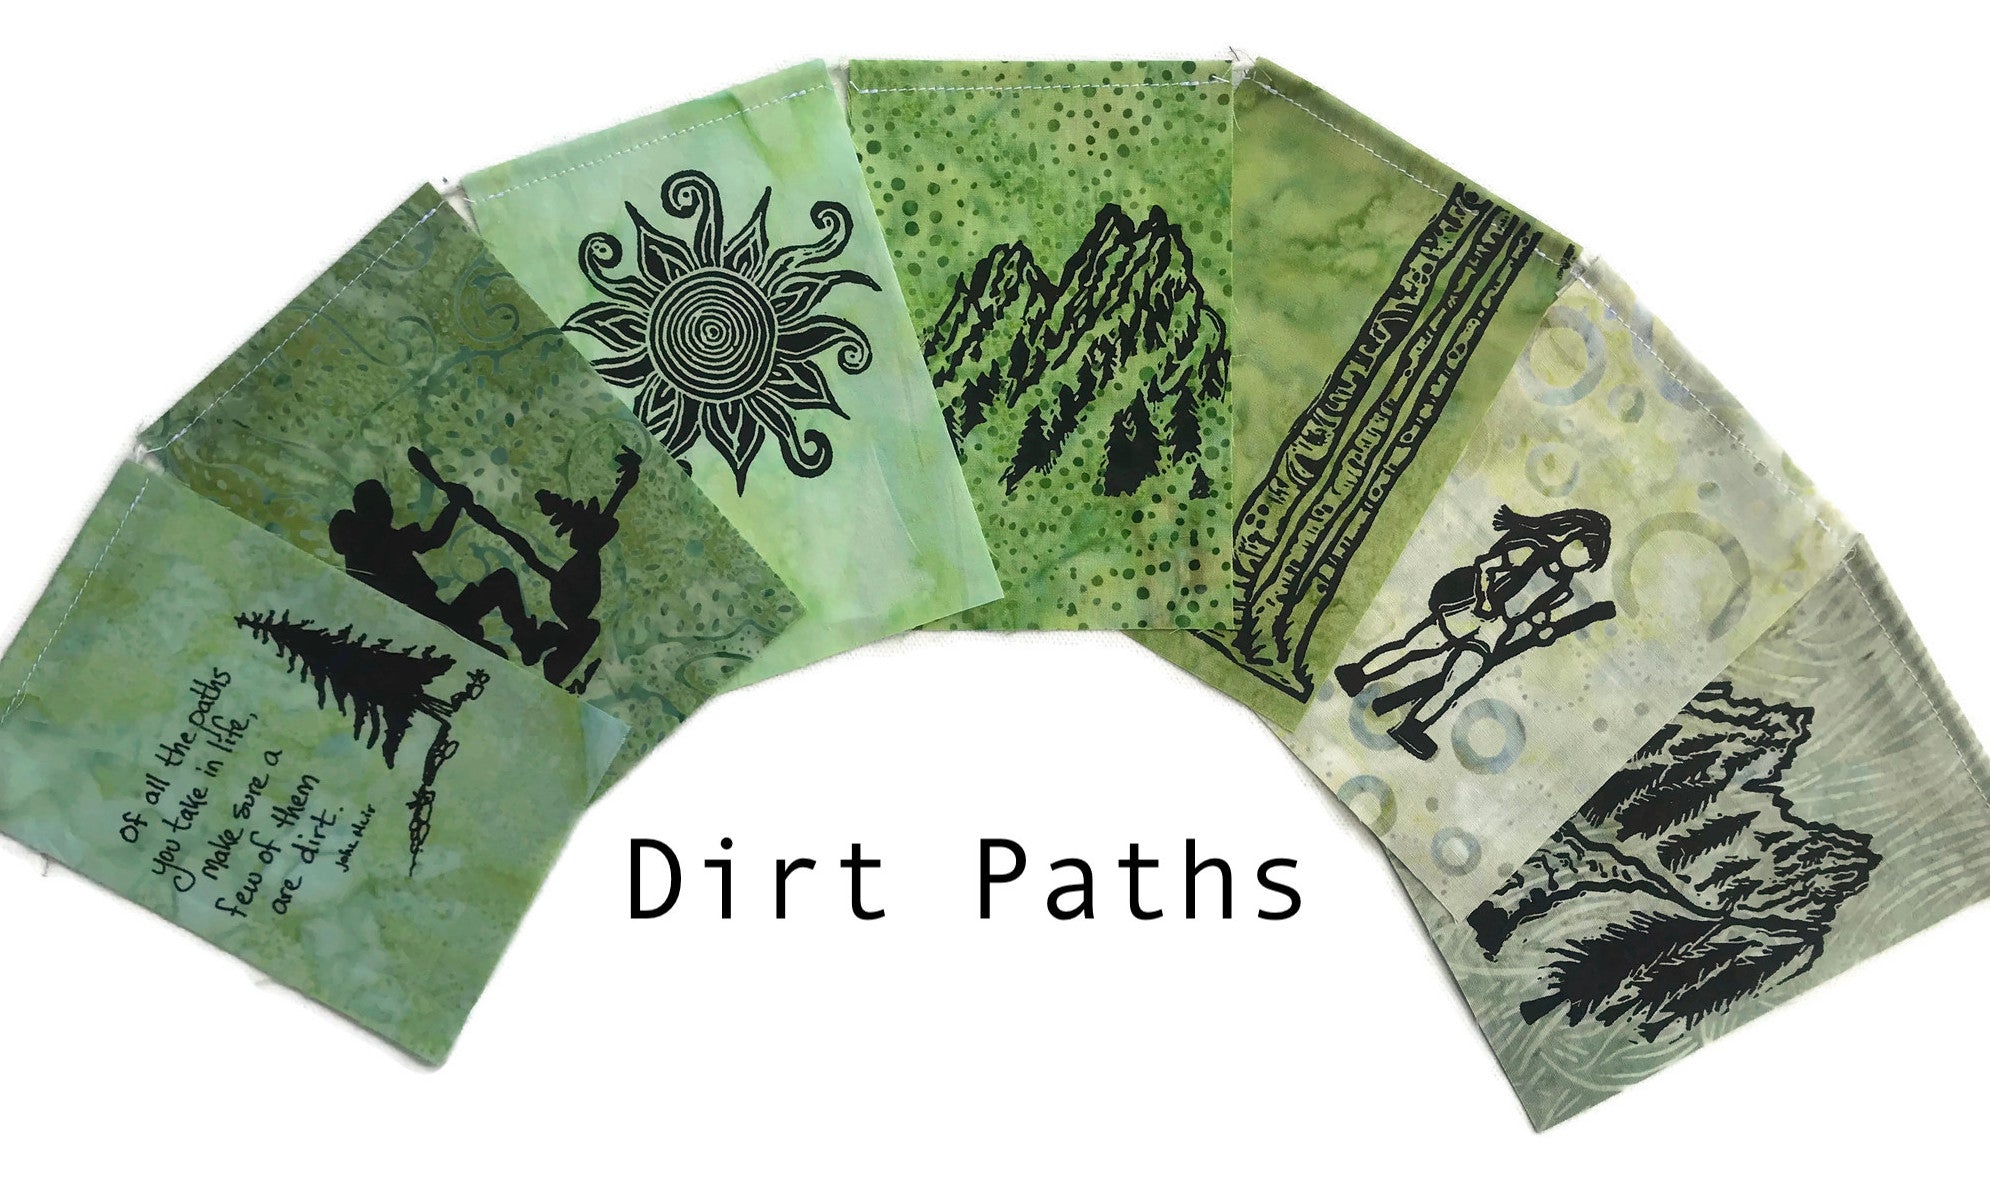 Small Flag Set with images and words to celebrate Hiking and taking dirt paths to celebrate the outdoors.